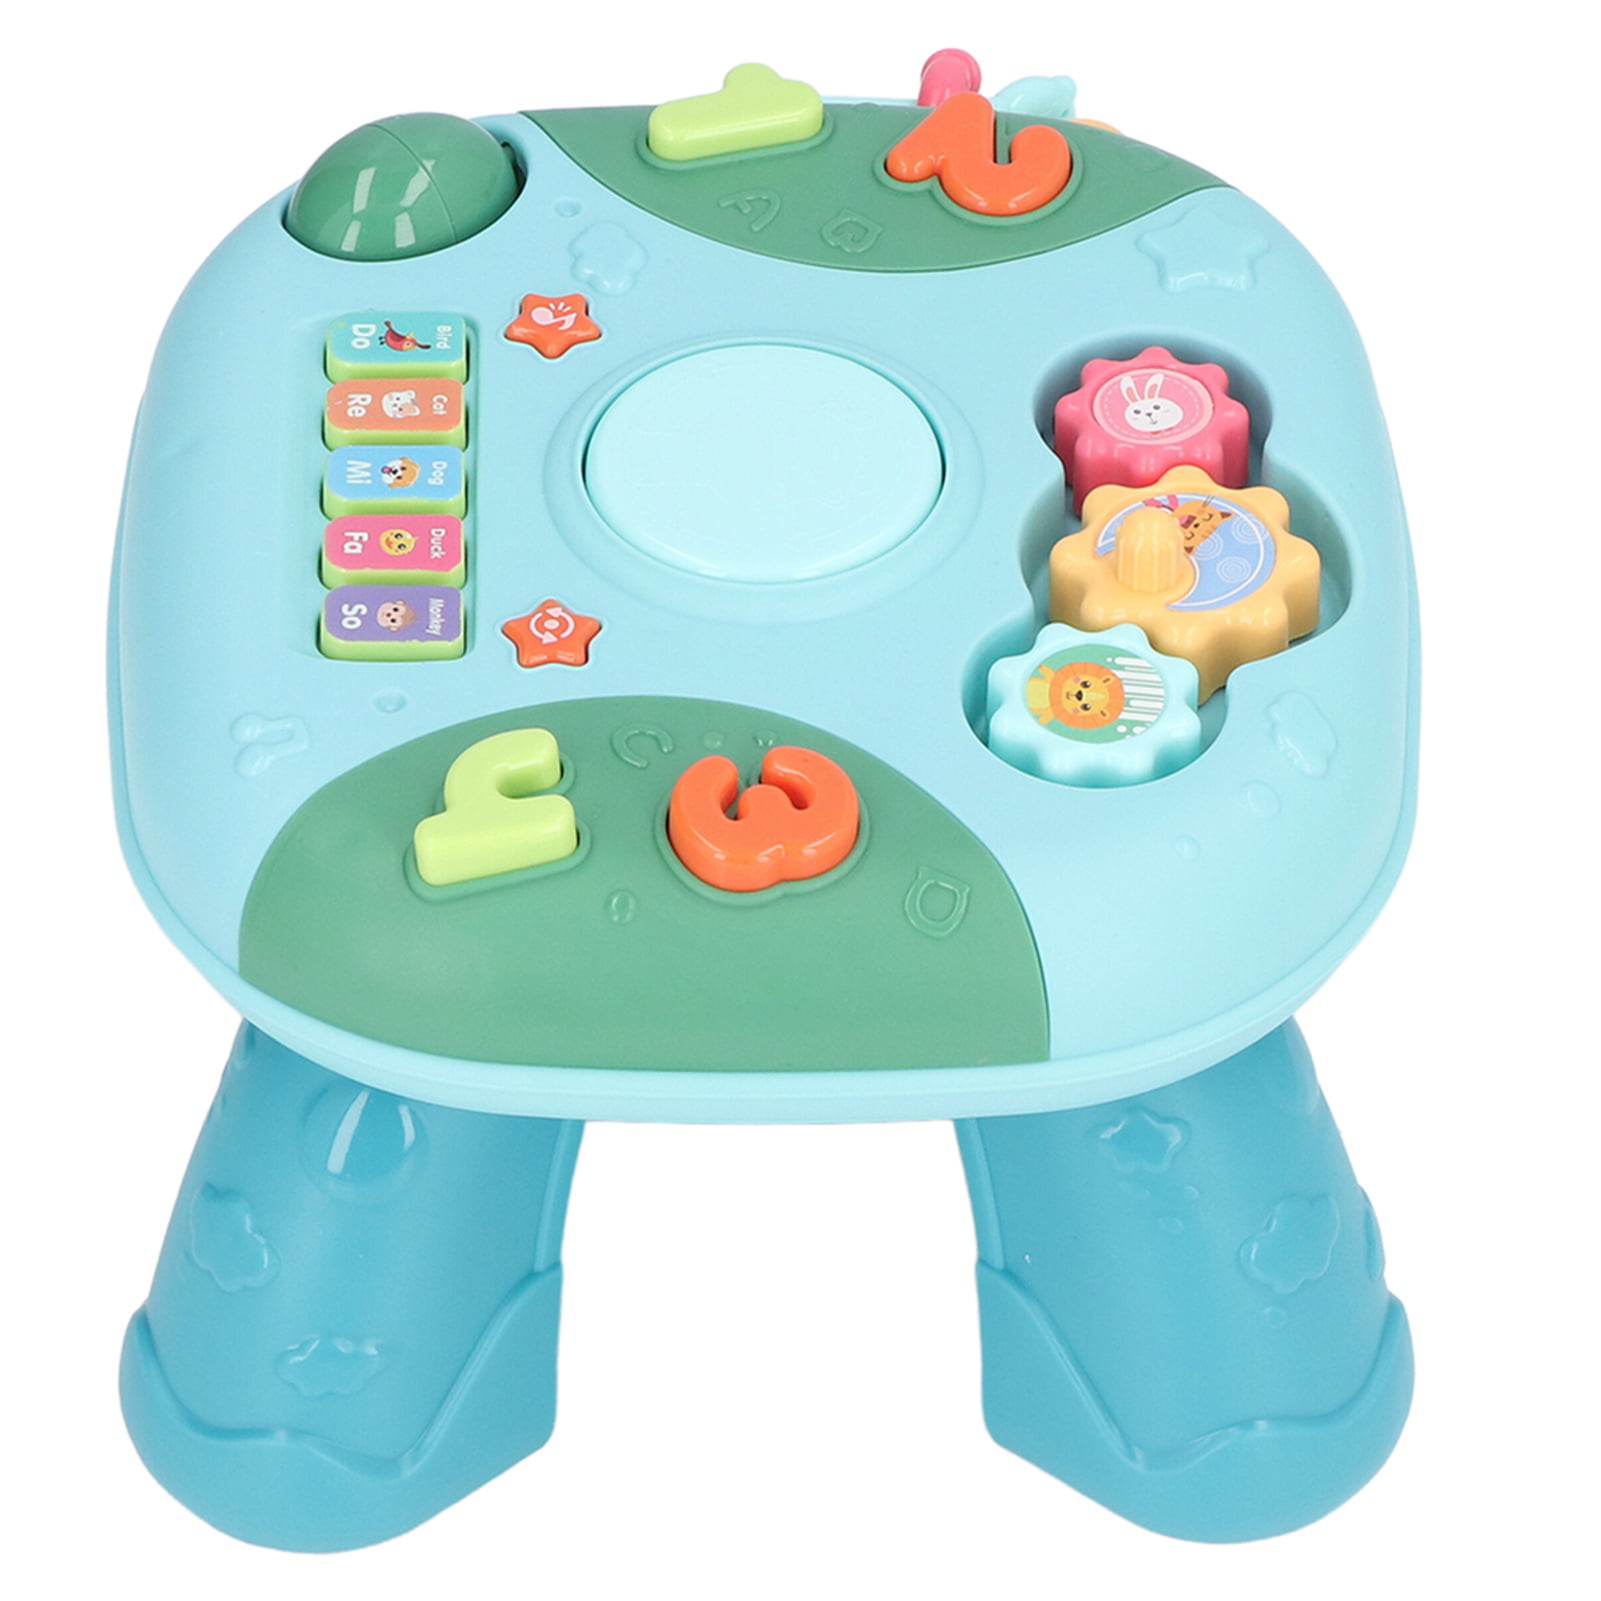 80148000 for sale online VTech 80-148000 Sit to Stand Activity Table 